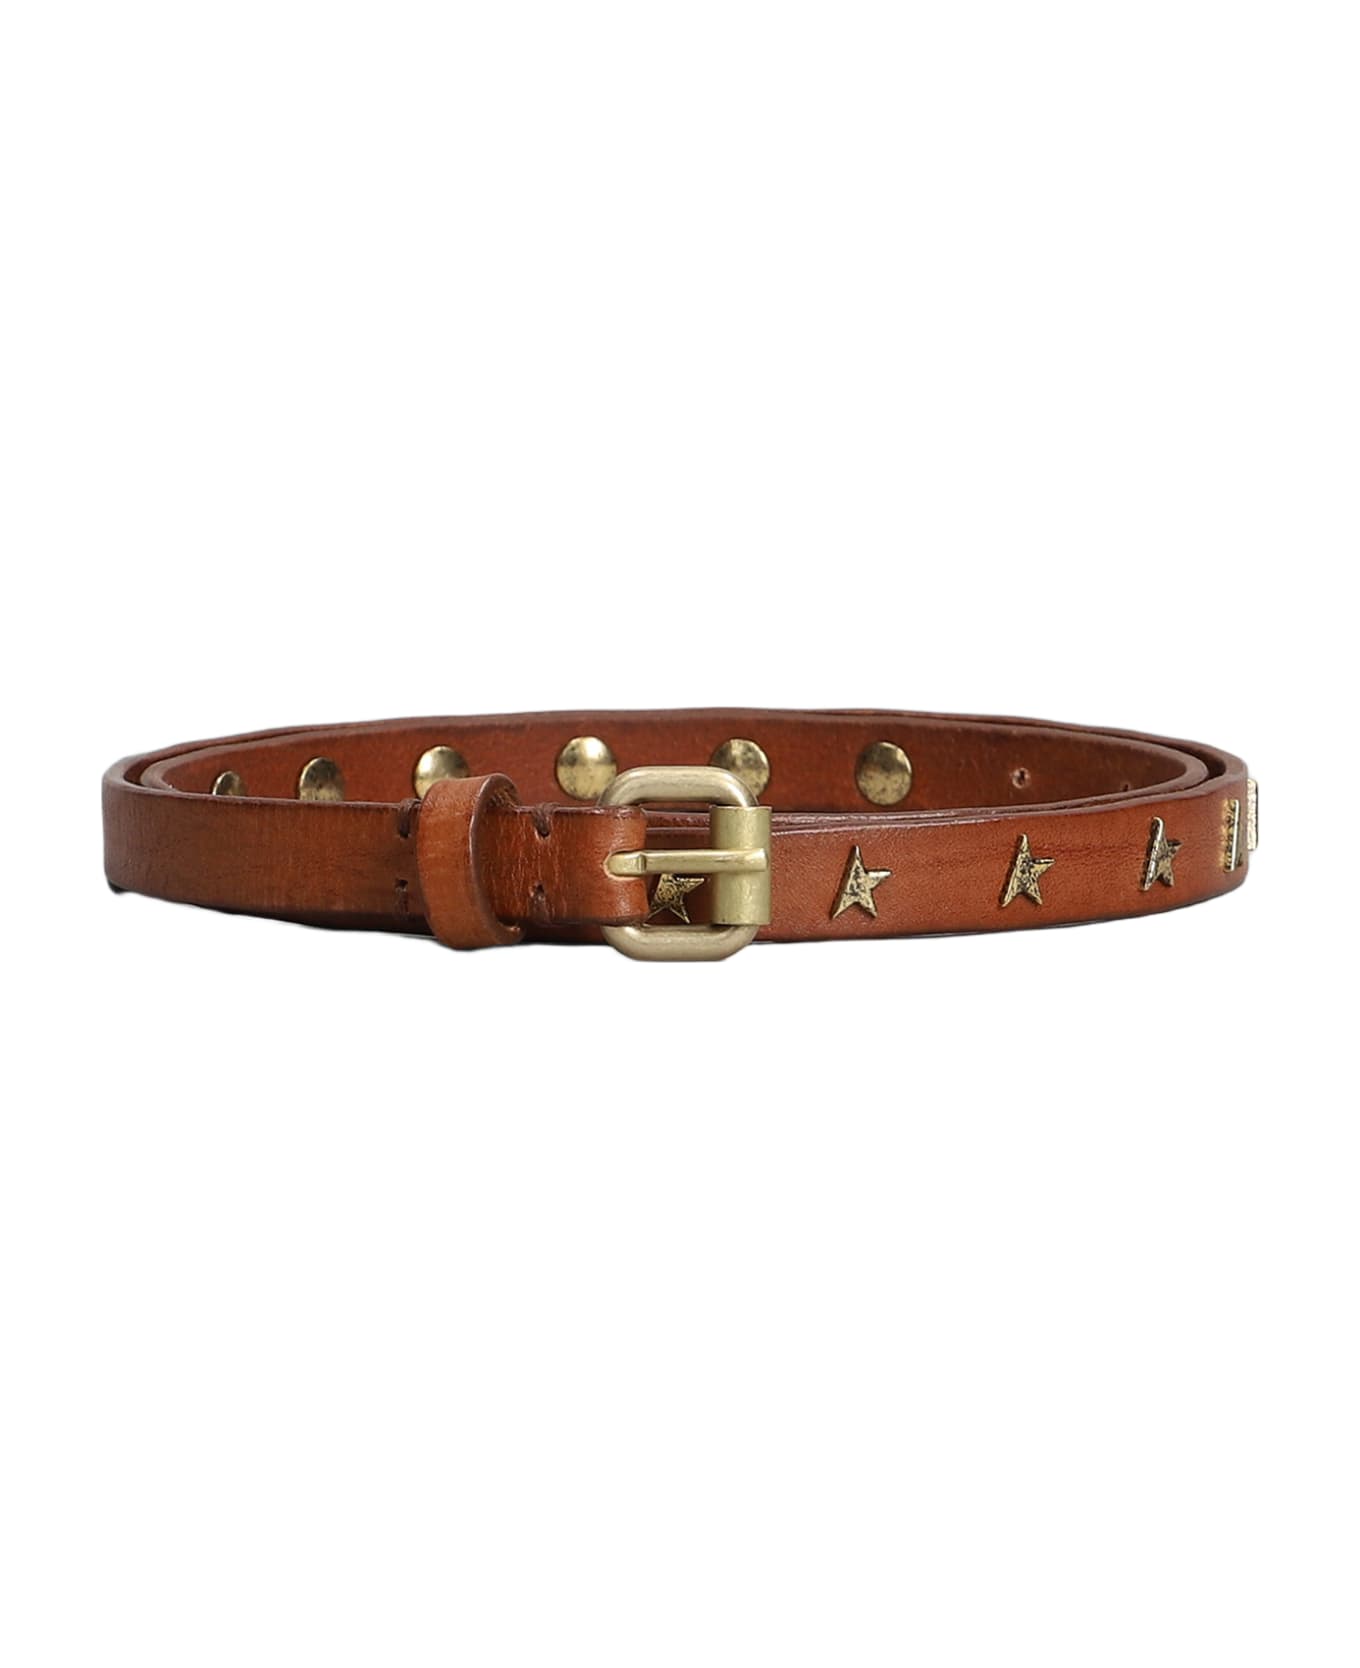 Golden Goose Belts In Leather Color Leather - leather color